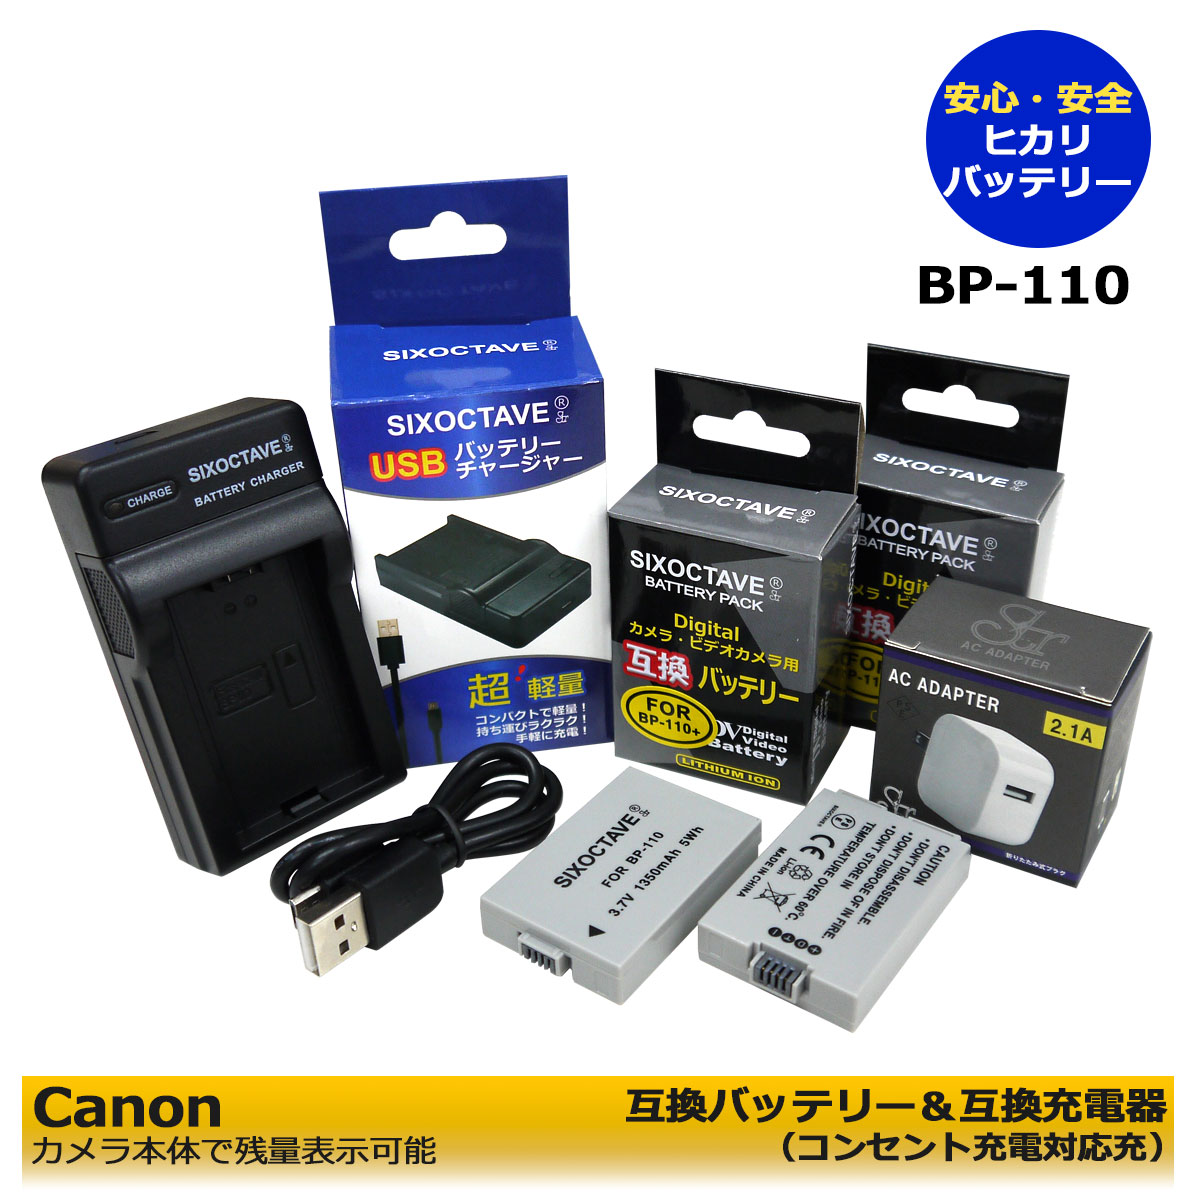 BP-110　送料無料　★コンセント充電